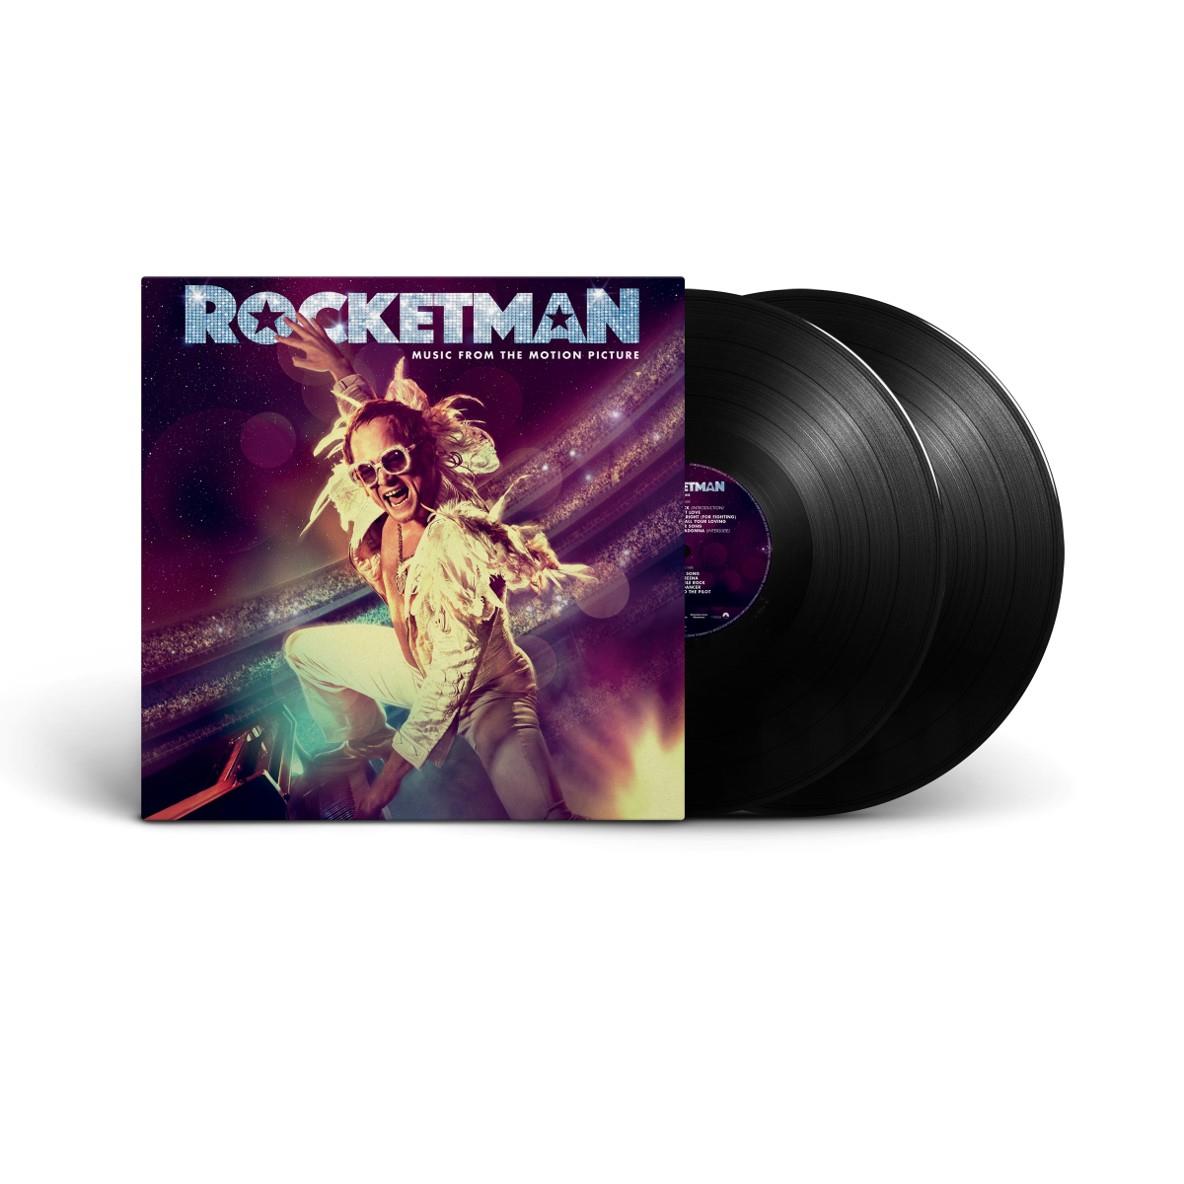 rocketman (music from motion picture)(vinyl)